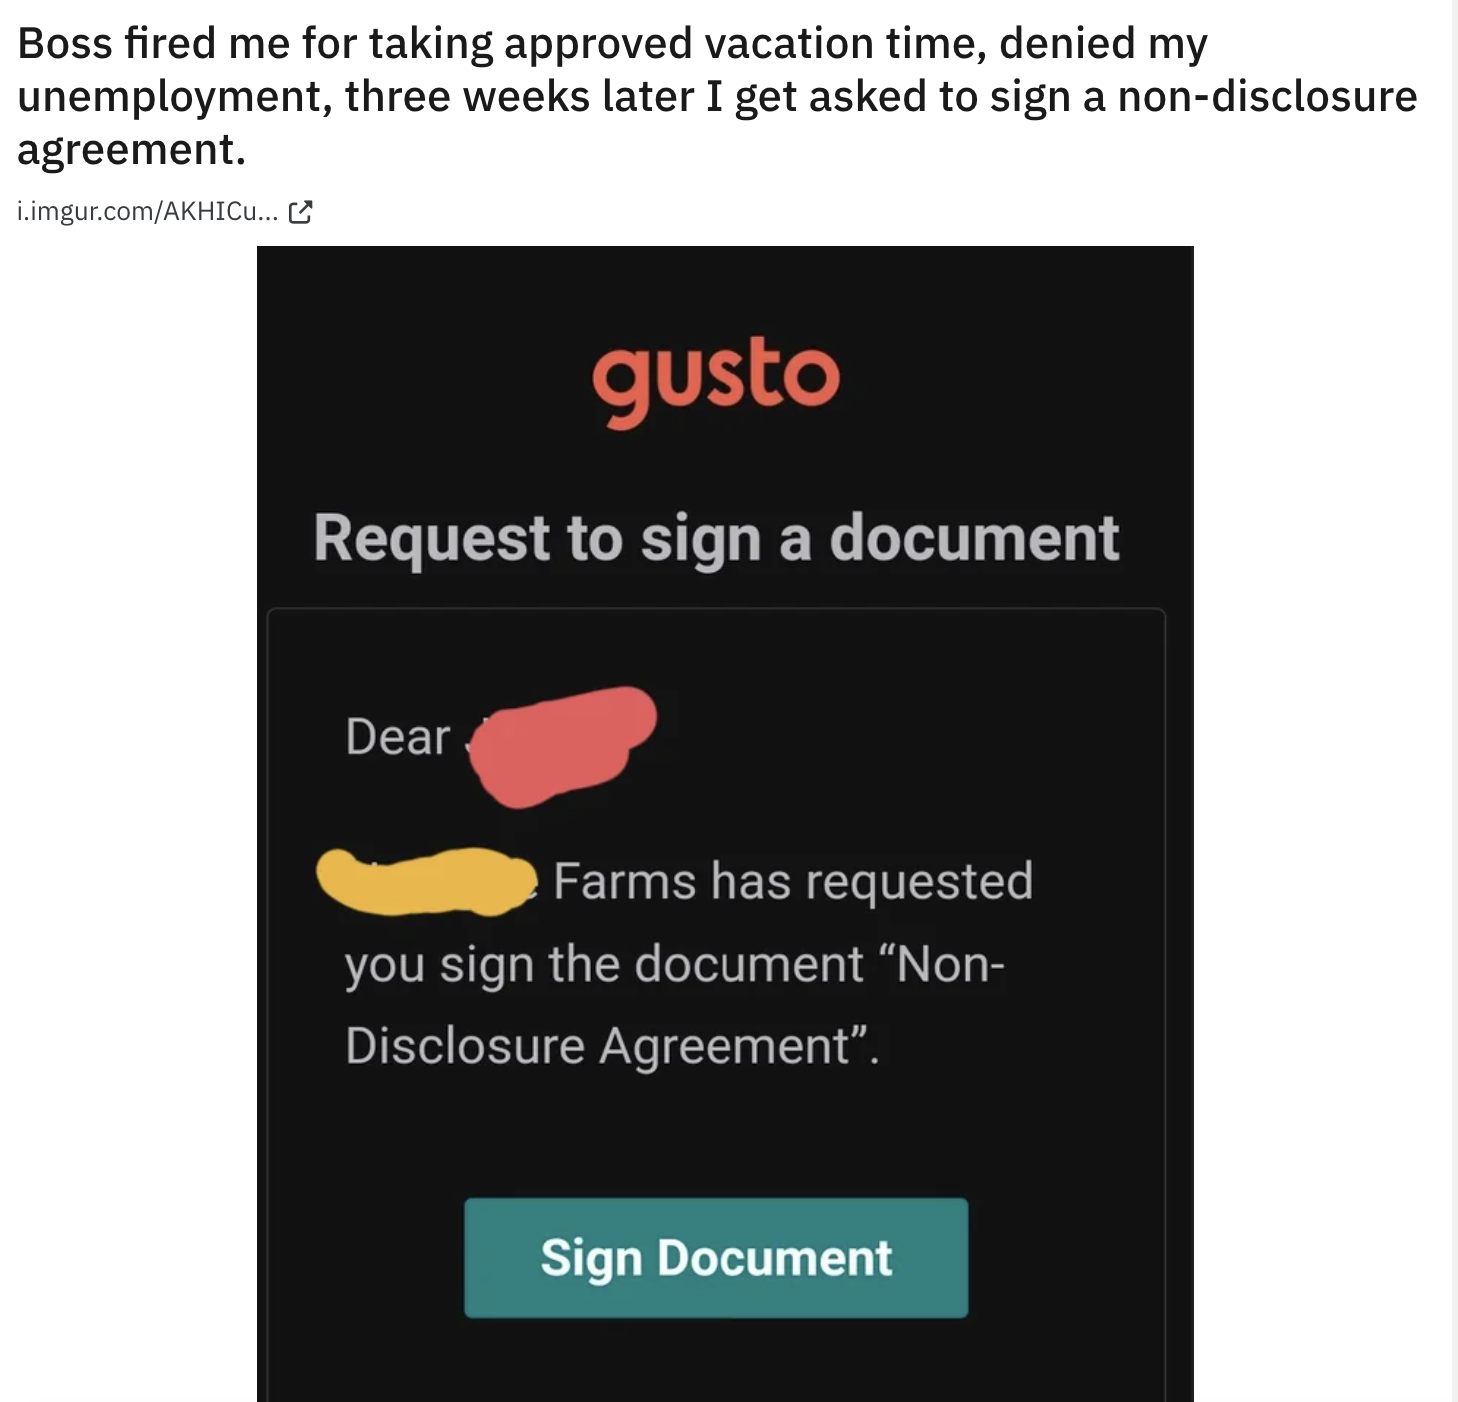 &quot;Farms has requested you sign the document&quot;